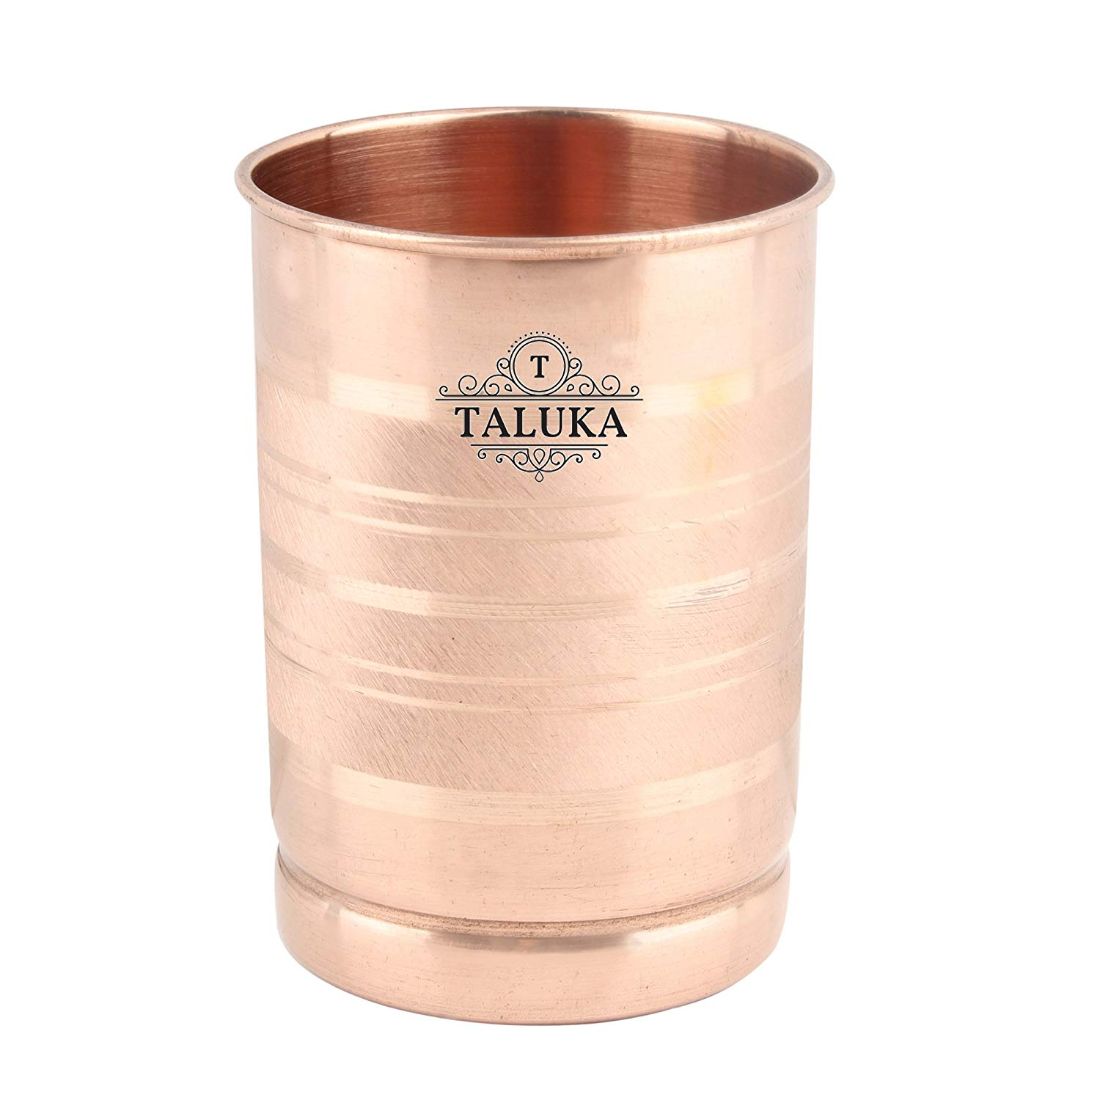 Pure Copper Handmade Water Pot Dispenser 2000 ML with 1 PC Copper Glass 300 ML For Storage Good Health Benefit